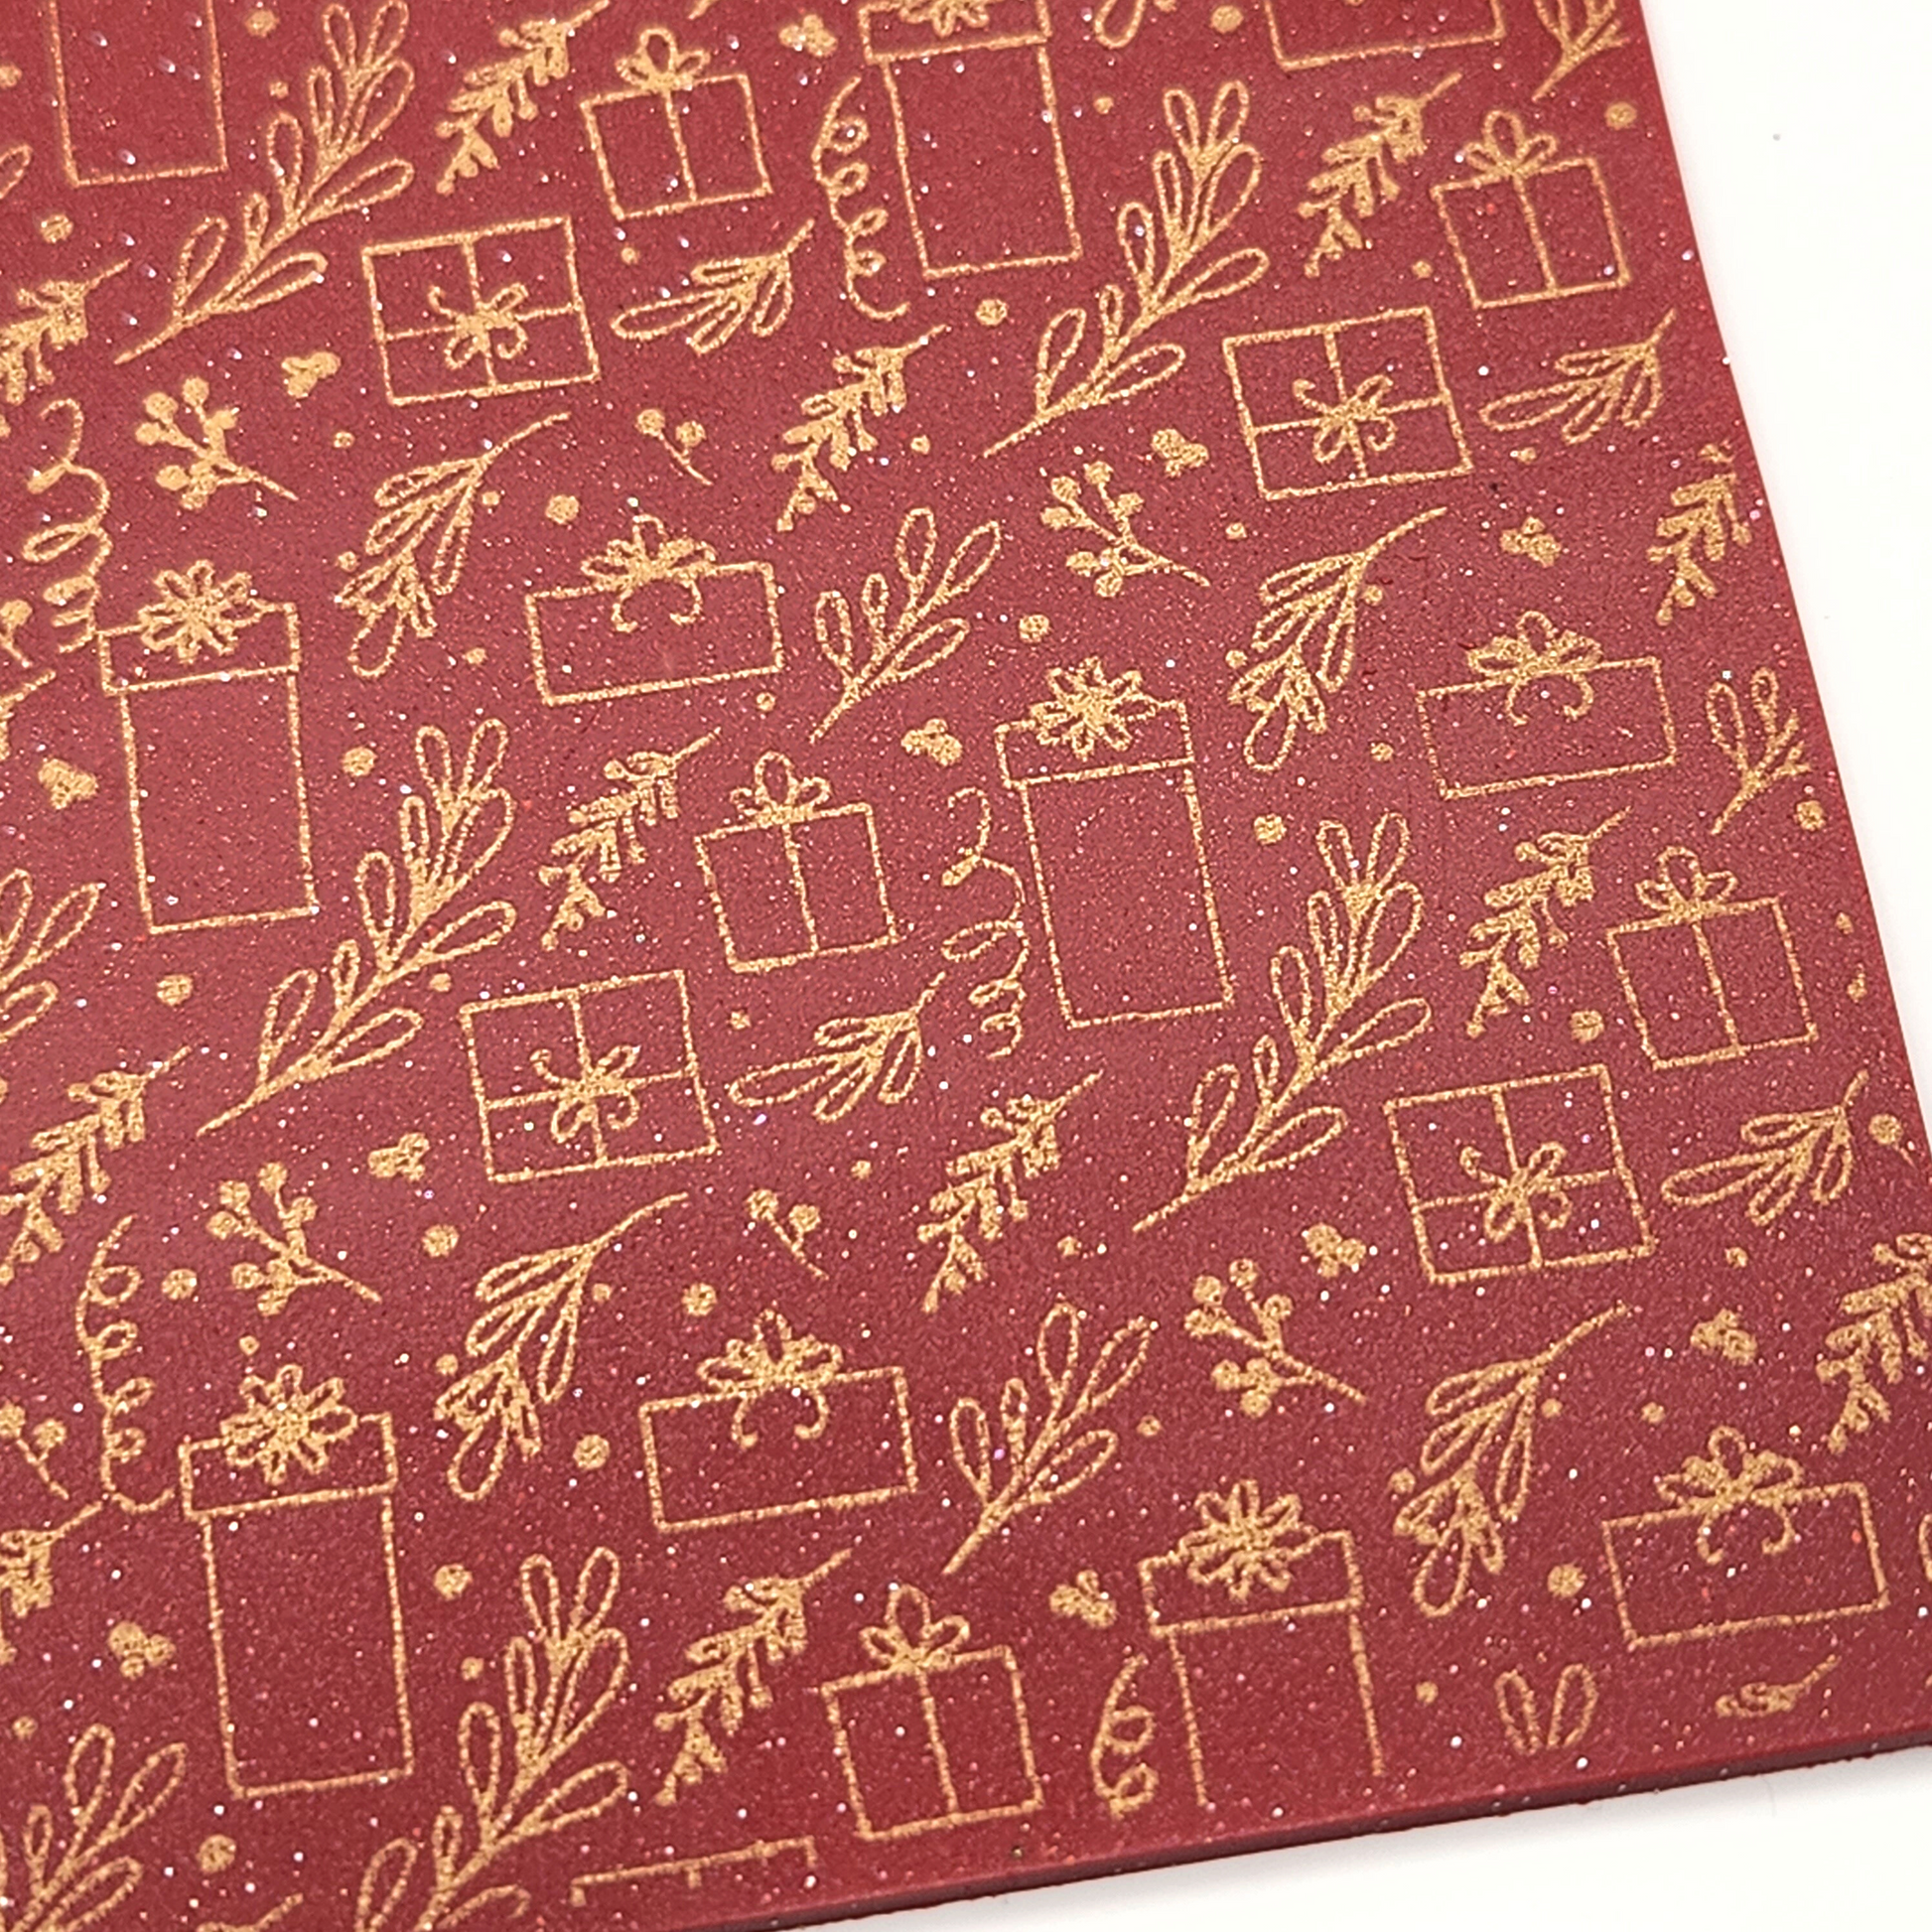 closer look at the polymer clay slab to show the details of the Yuletide Gifts Silk Screen design pattern